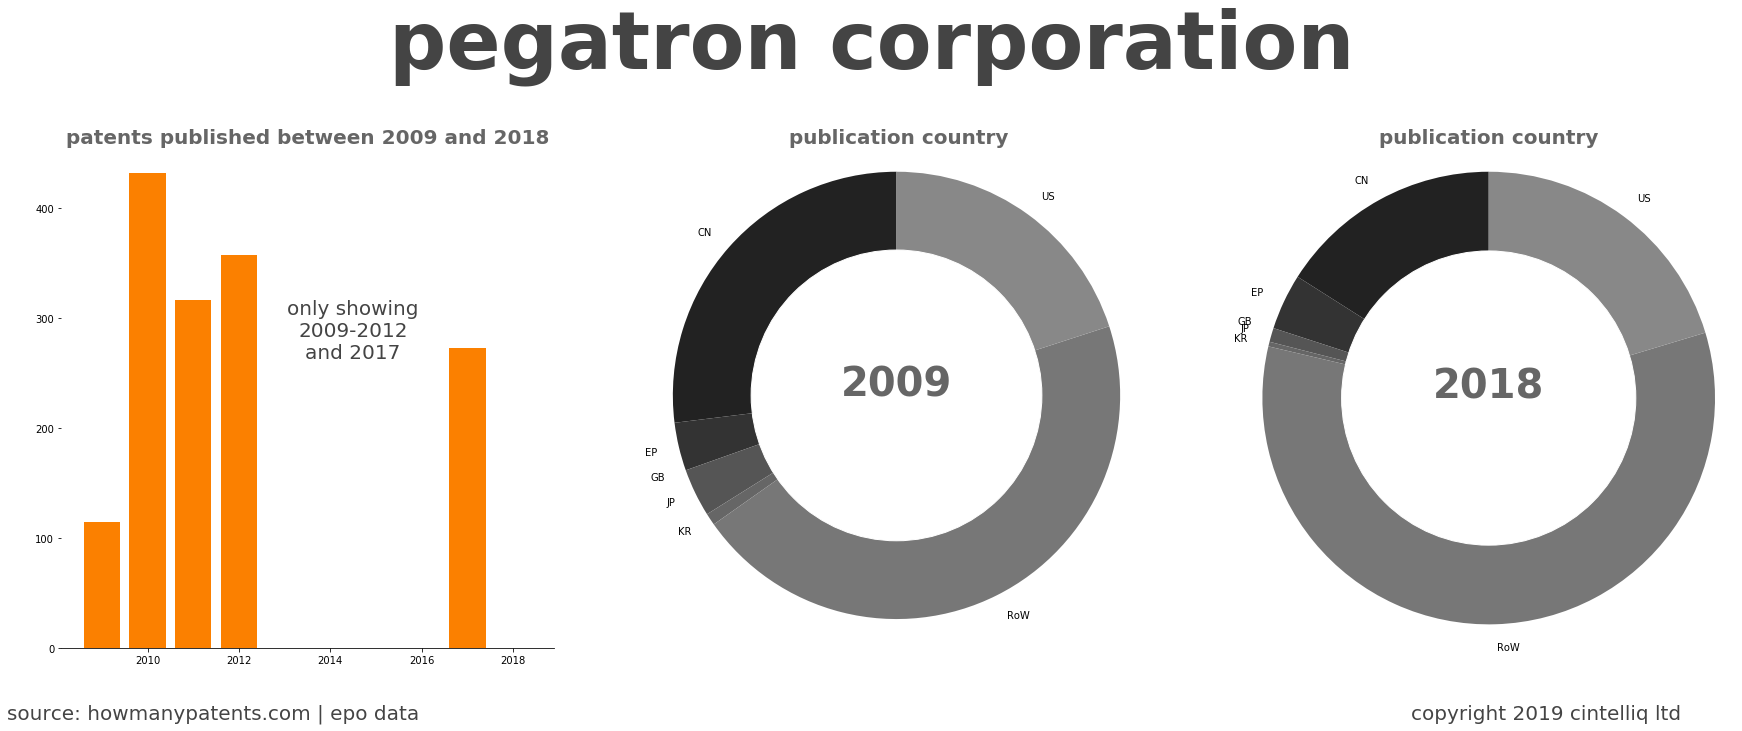 summary of patents for Pegatron Corporation